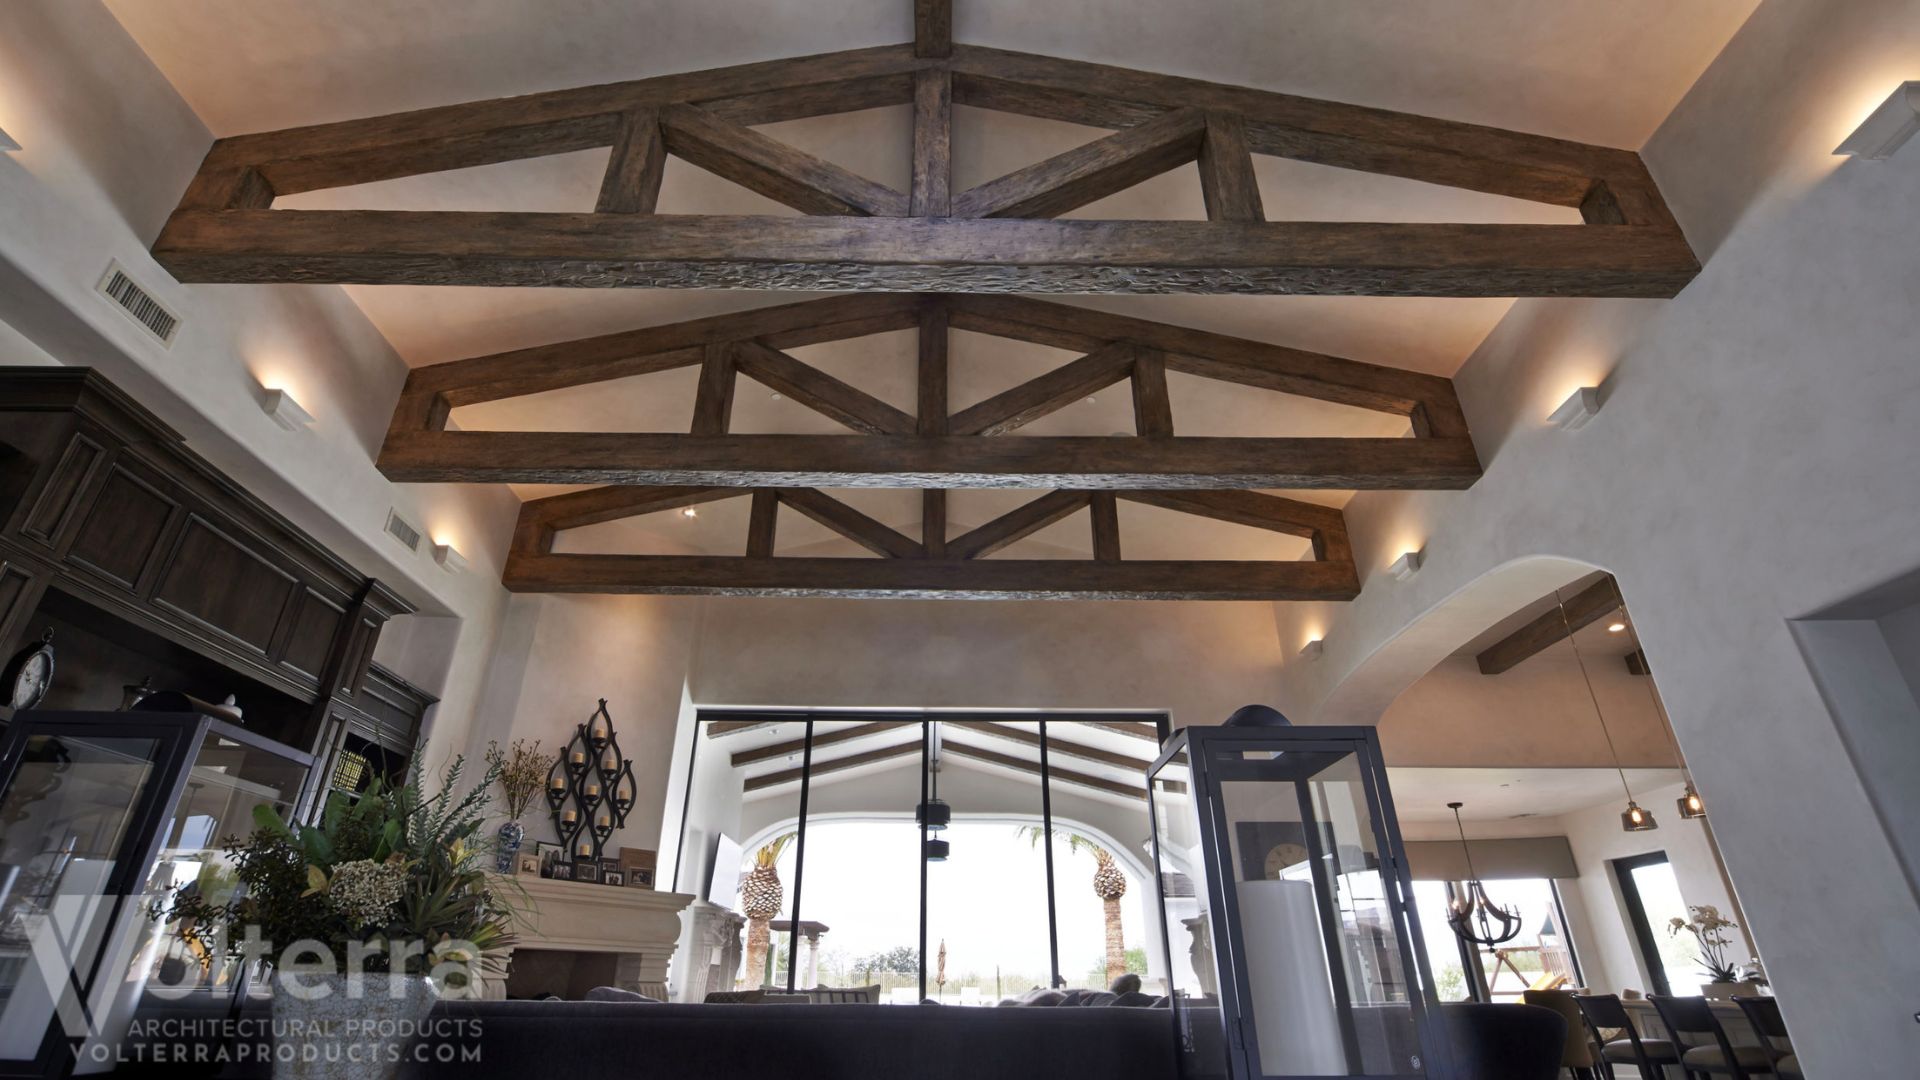 Incorporating Trusses and Trim into Your Modern Design